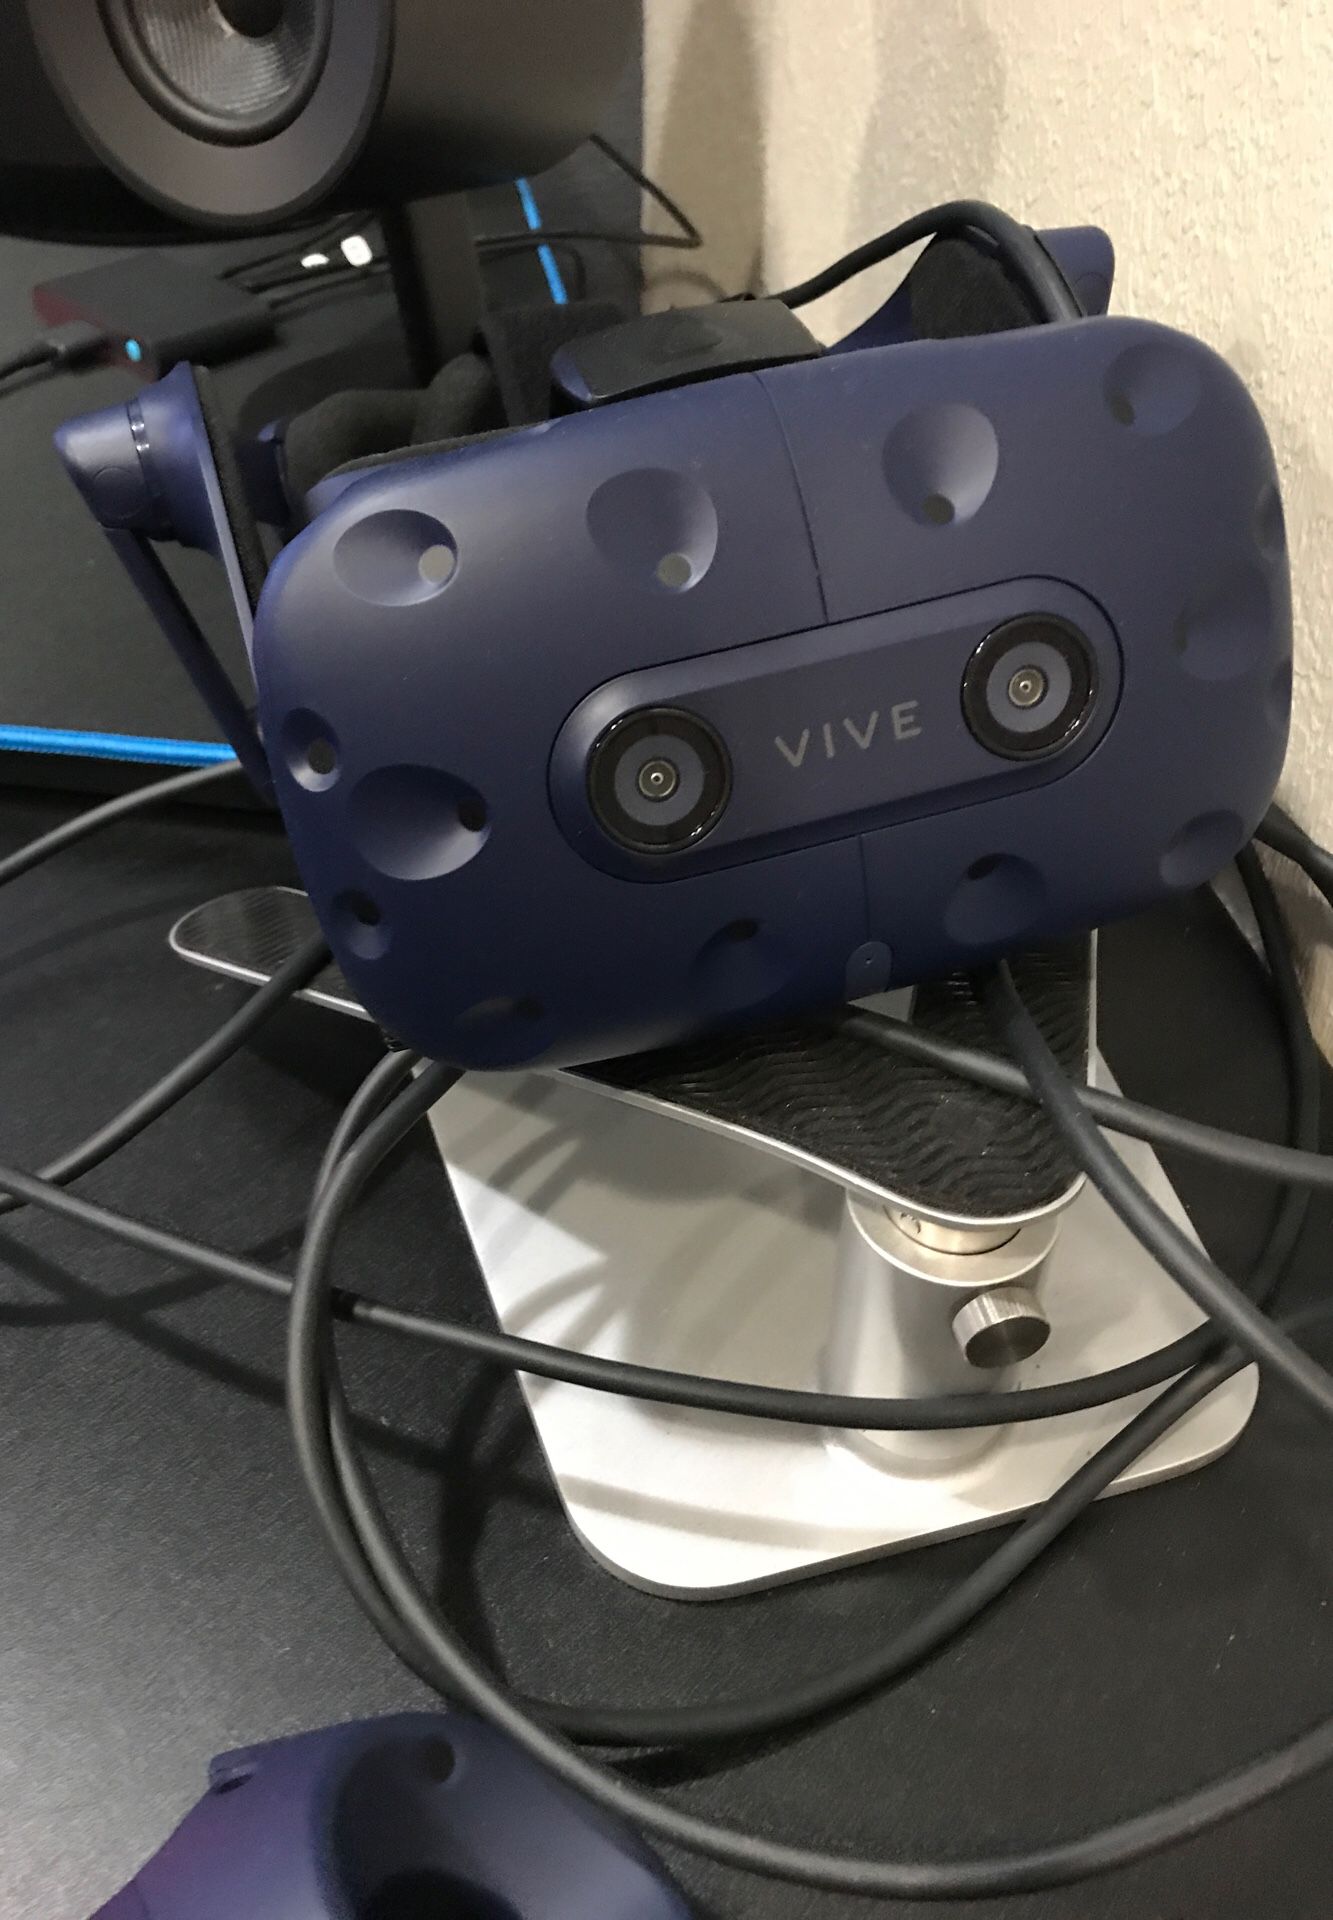 VIVE PRO HMD WITH WIRELESS ADAPTER and accessories